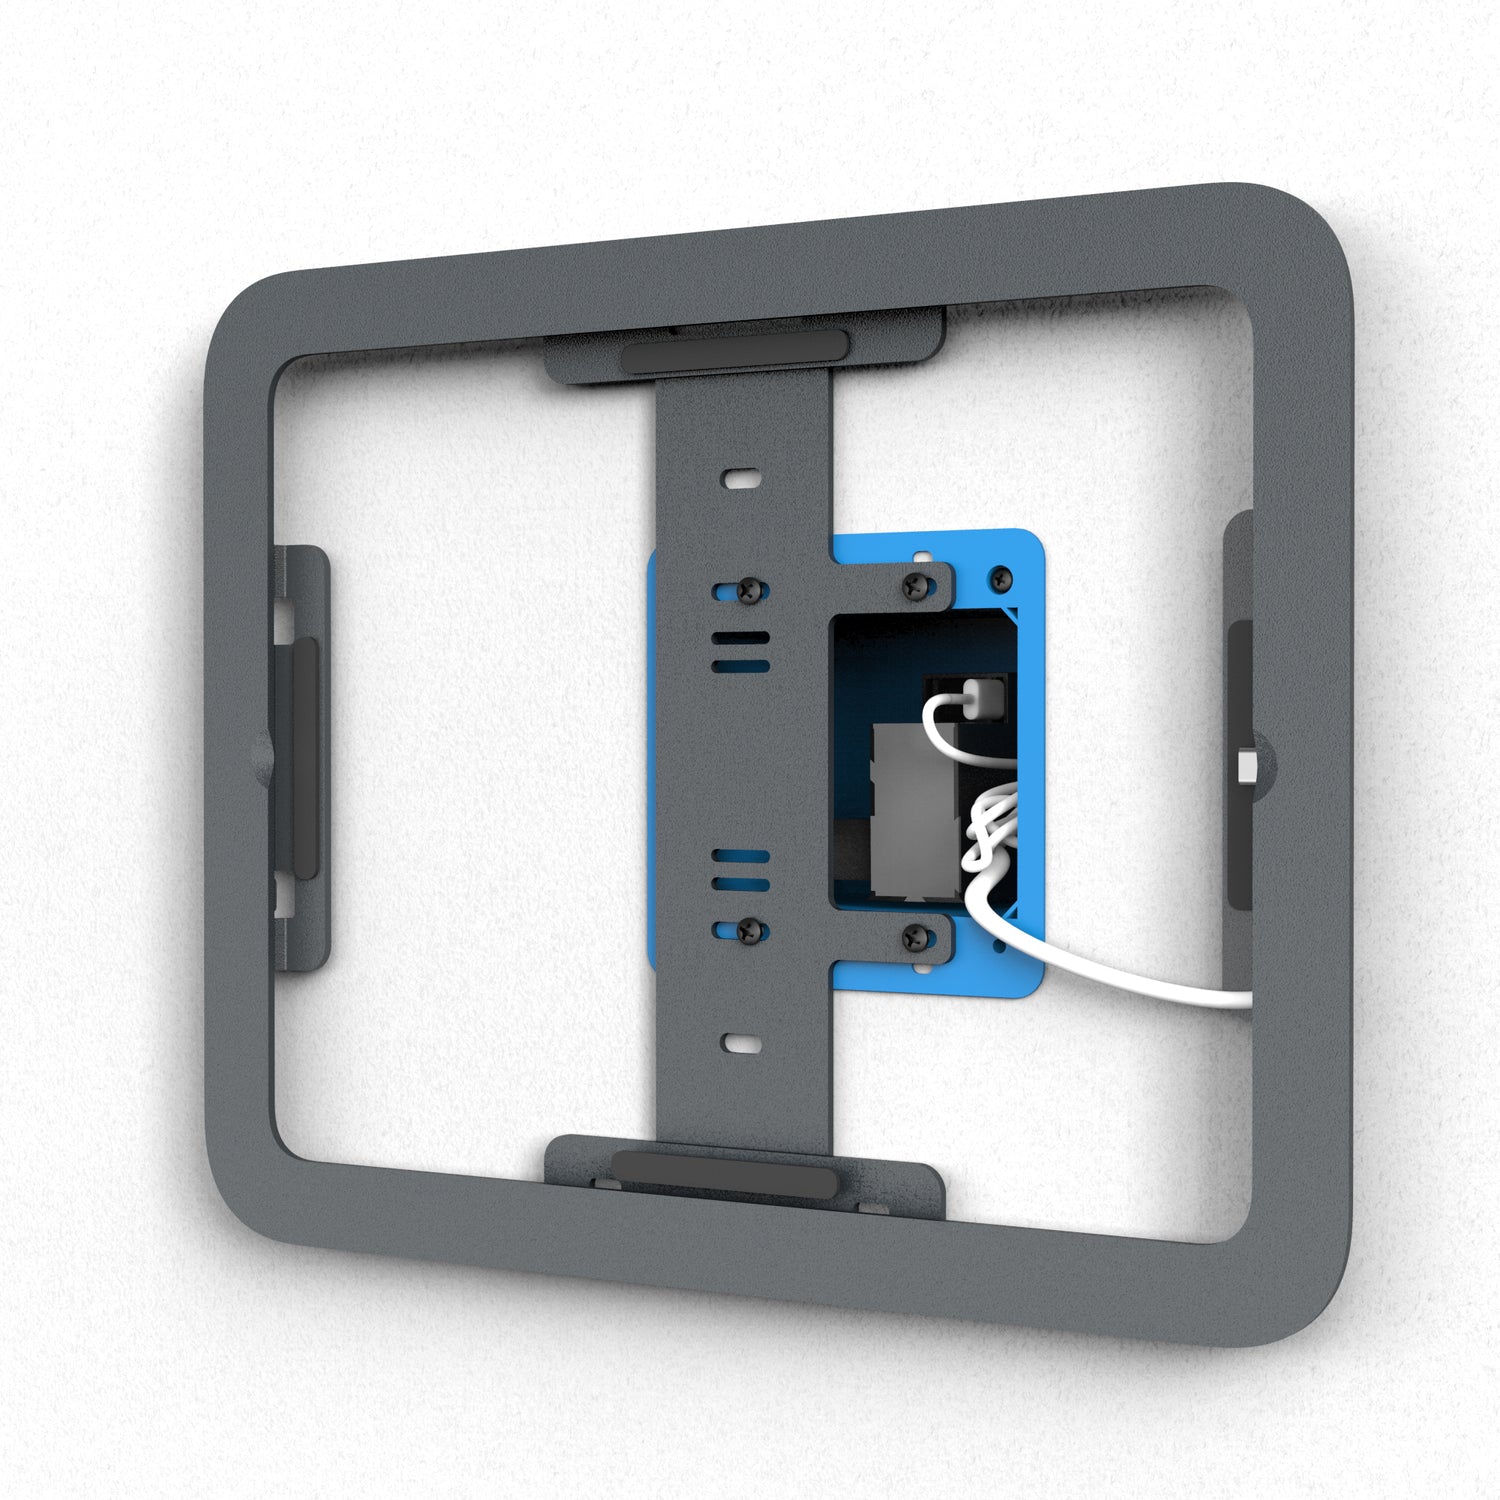 Hold. Charge. Protect., iPad Cases, Stands & Wall Mounts